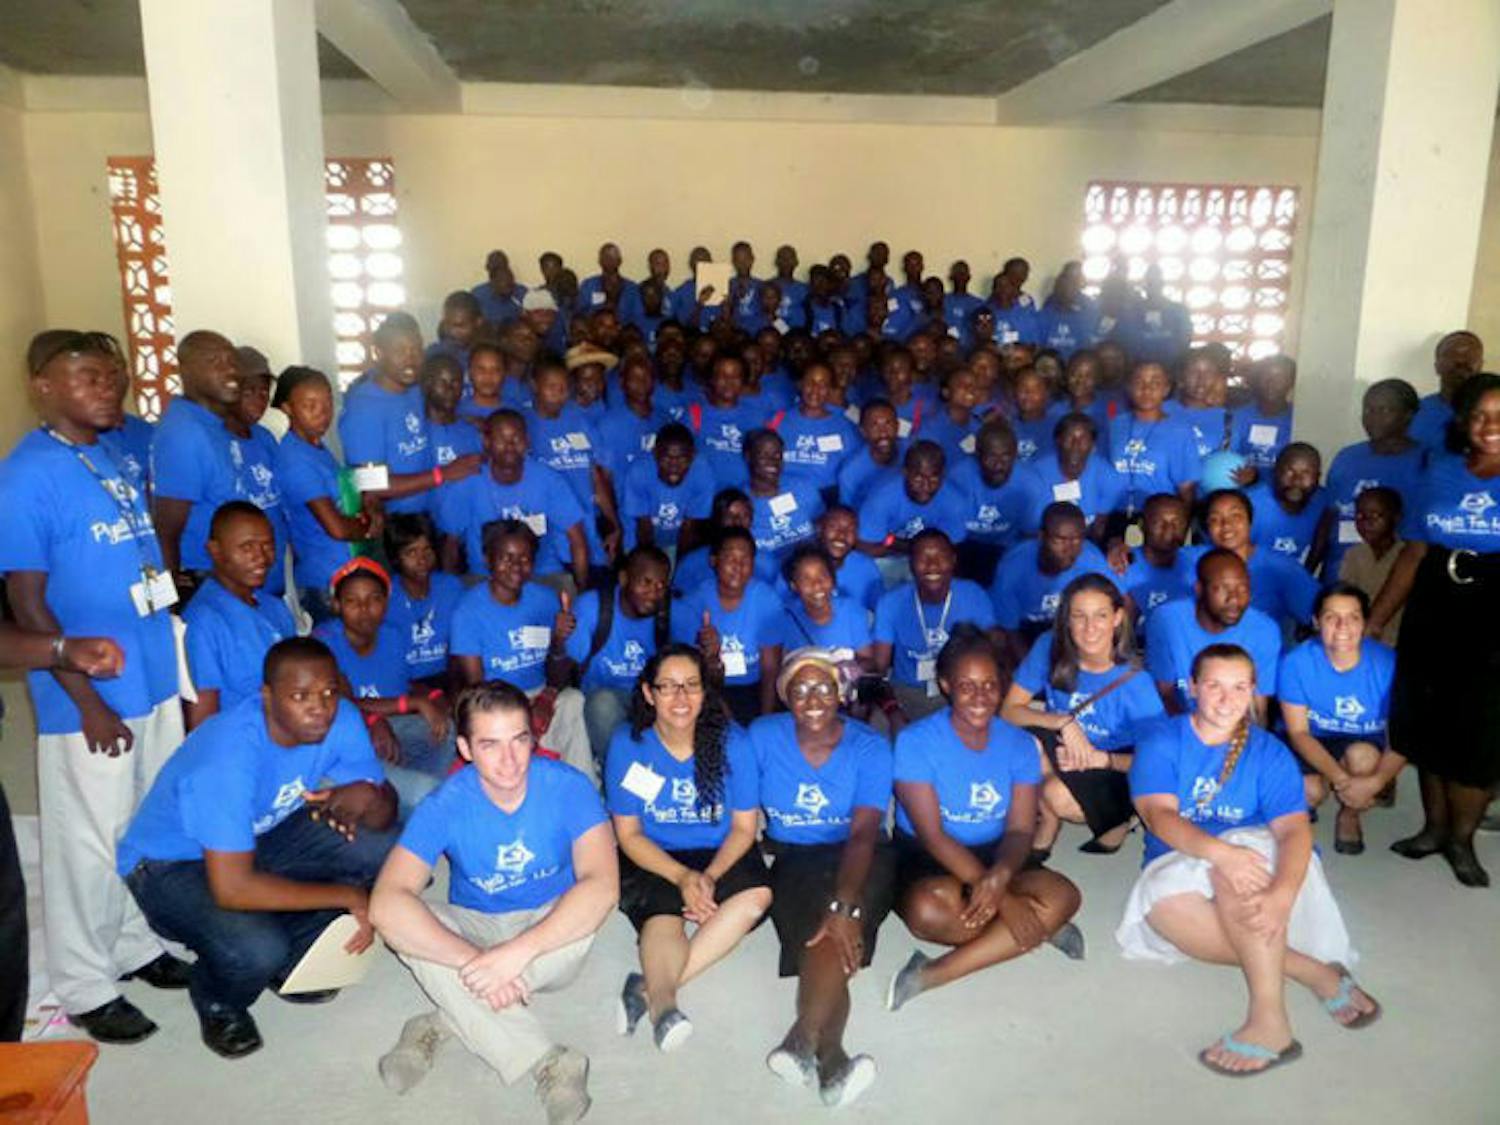 Pictured are 135 teachers from the conference held by Projects for Haiti. The event helps them network and improve teaching skills through workshops and training exercises.